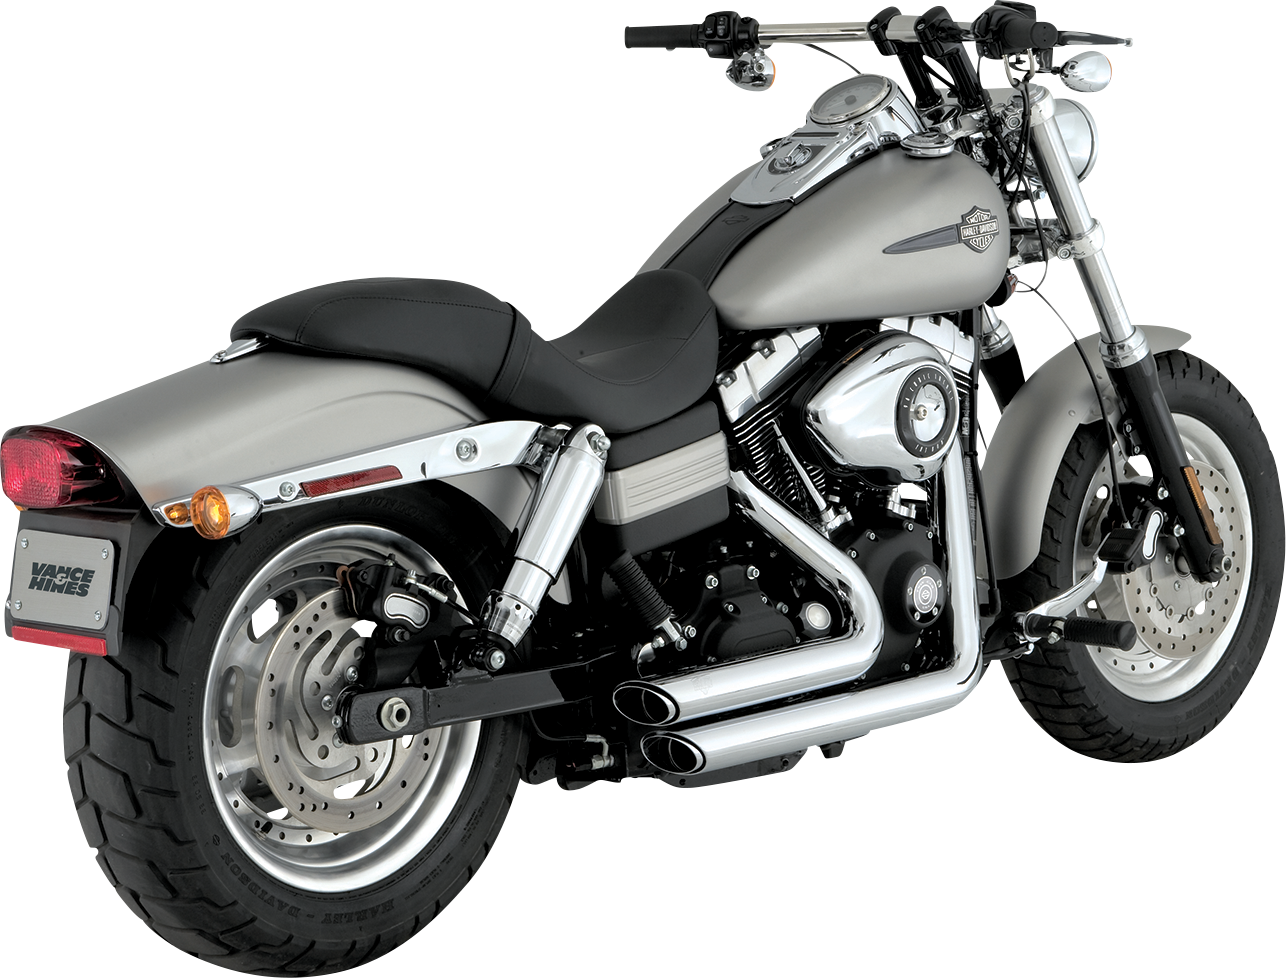 Vance & Hines Chrome Short Shot Staggered Exhaust System 2006-2011 Harley Dyna